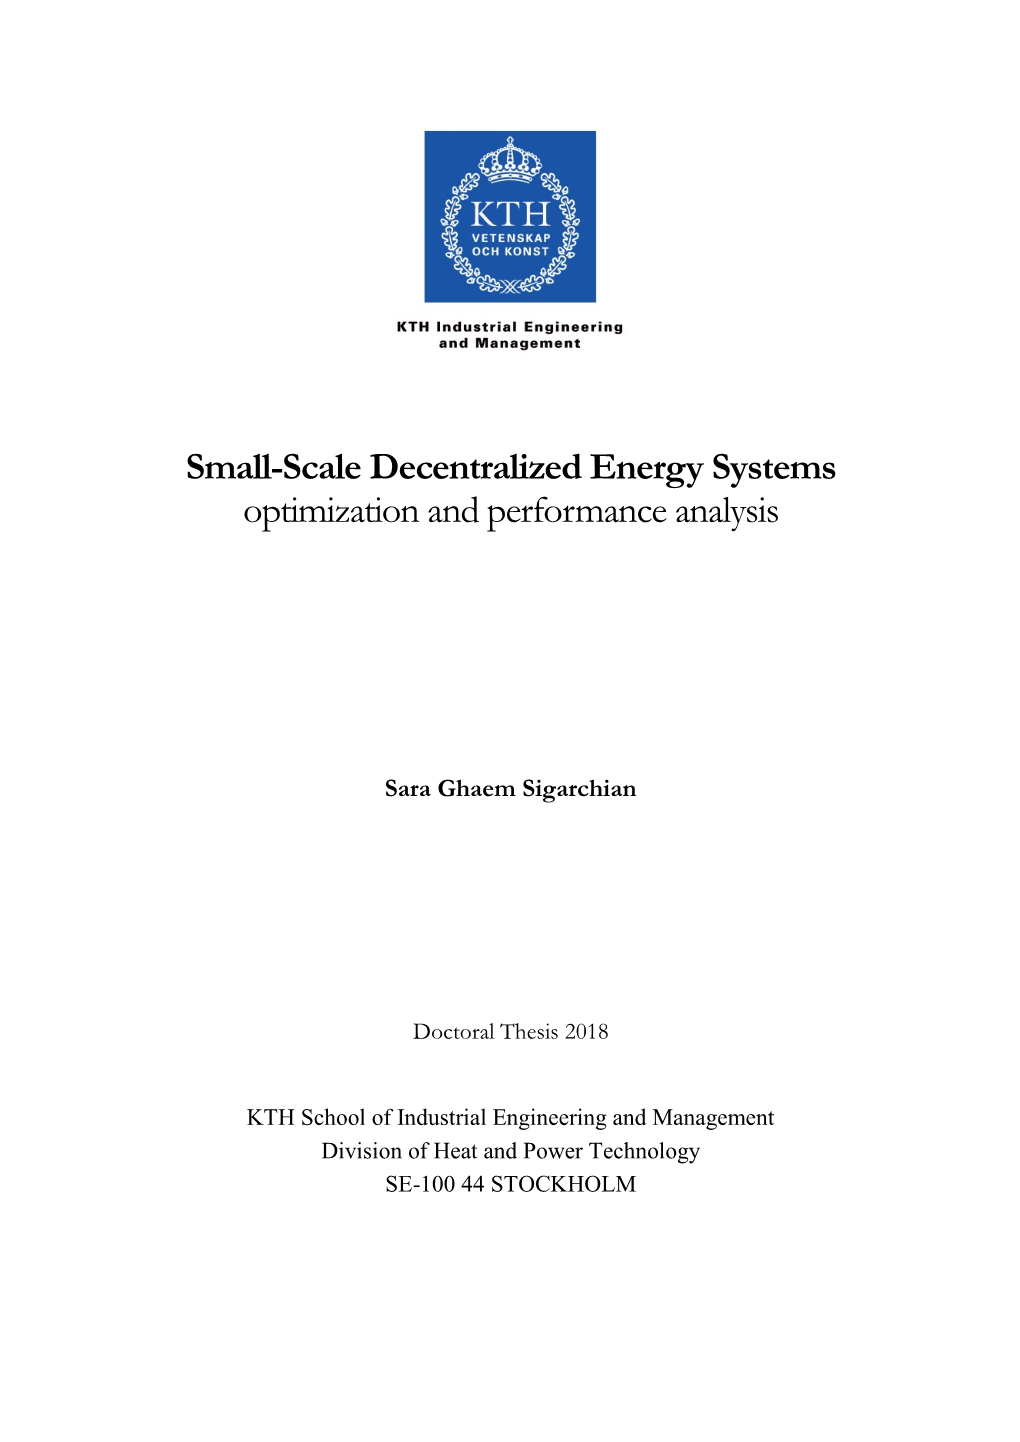 Small-Scale Decentralized Energy Systems Optimization and Performance Analysis